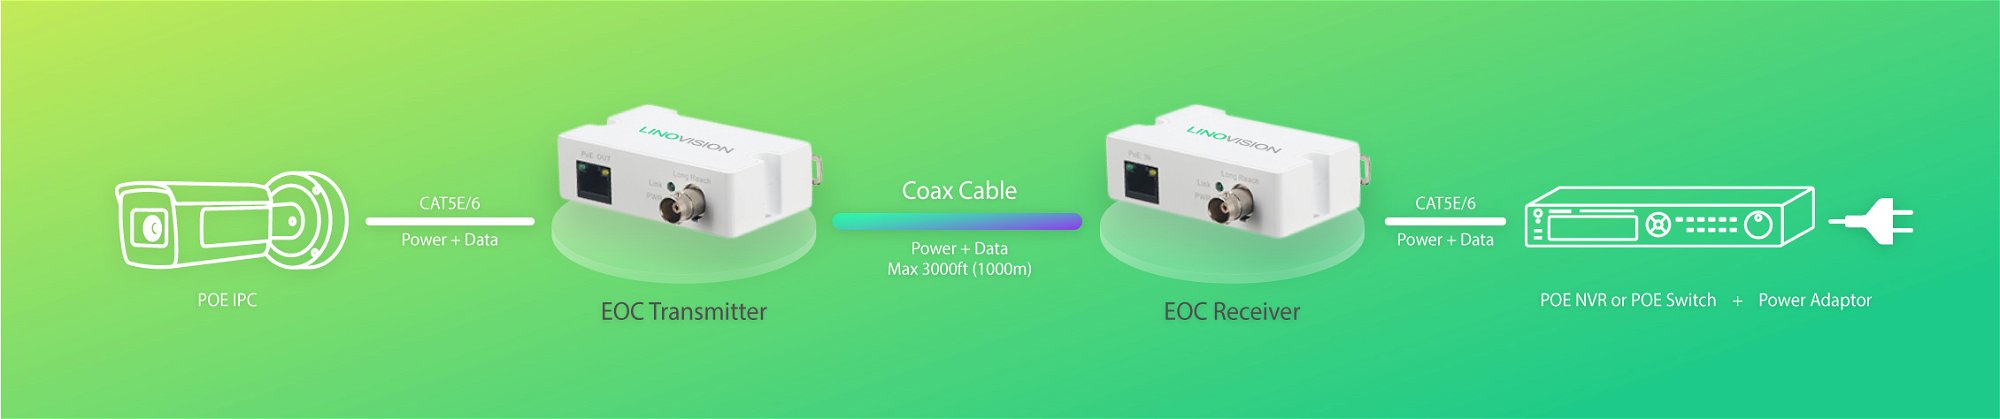 PoE over Coax Solution